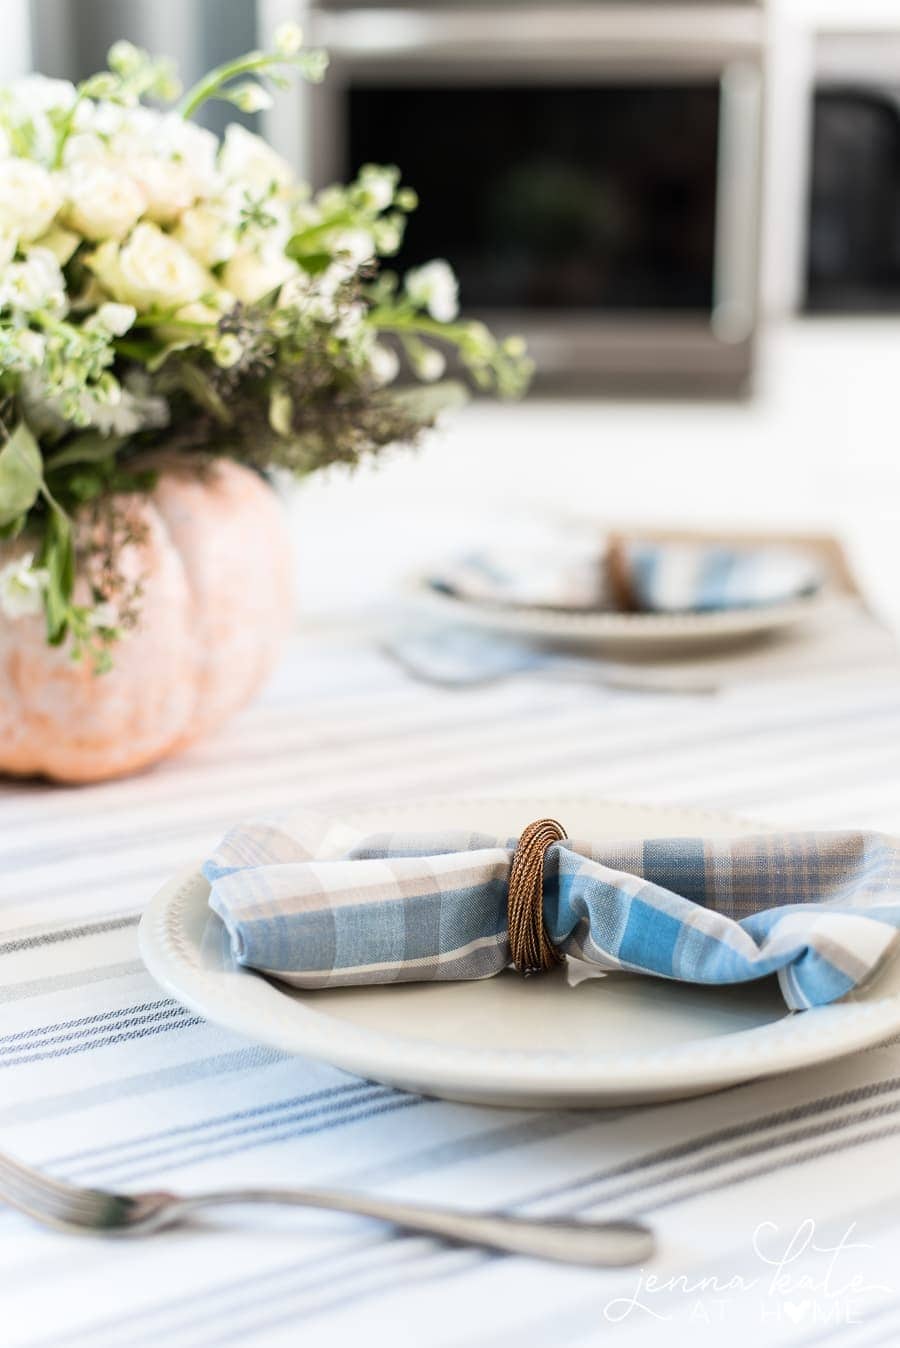 switching up your napkins is an easy way to transition to fall decor